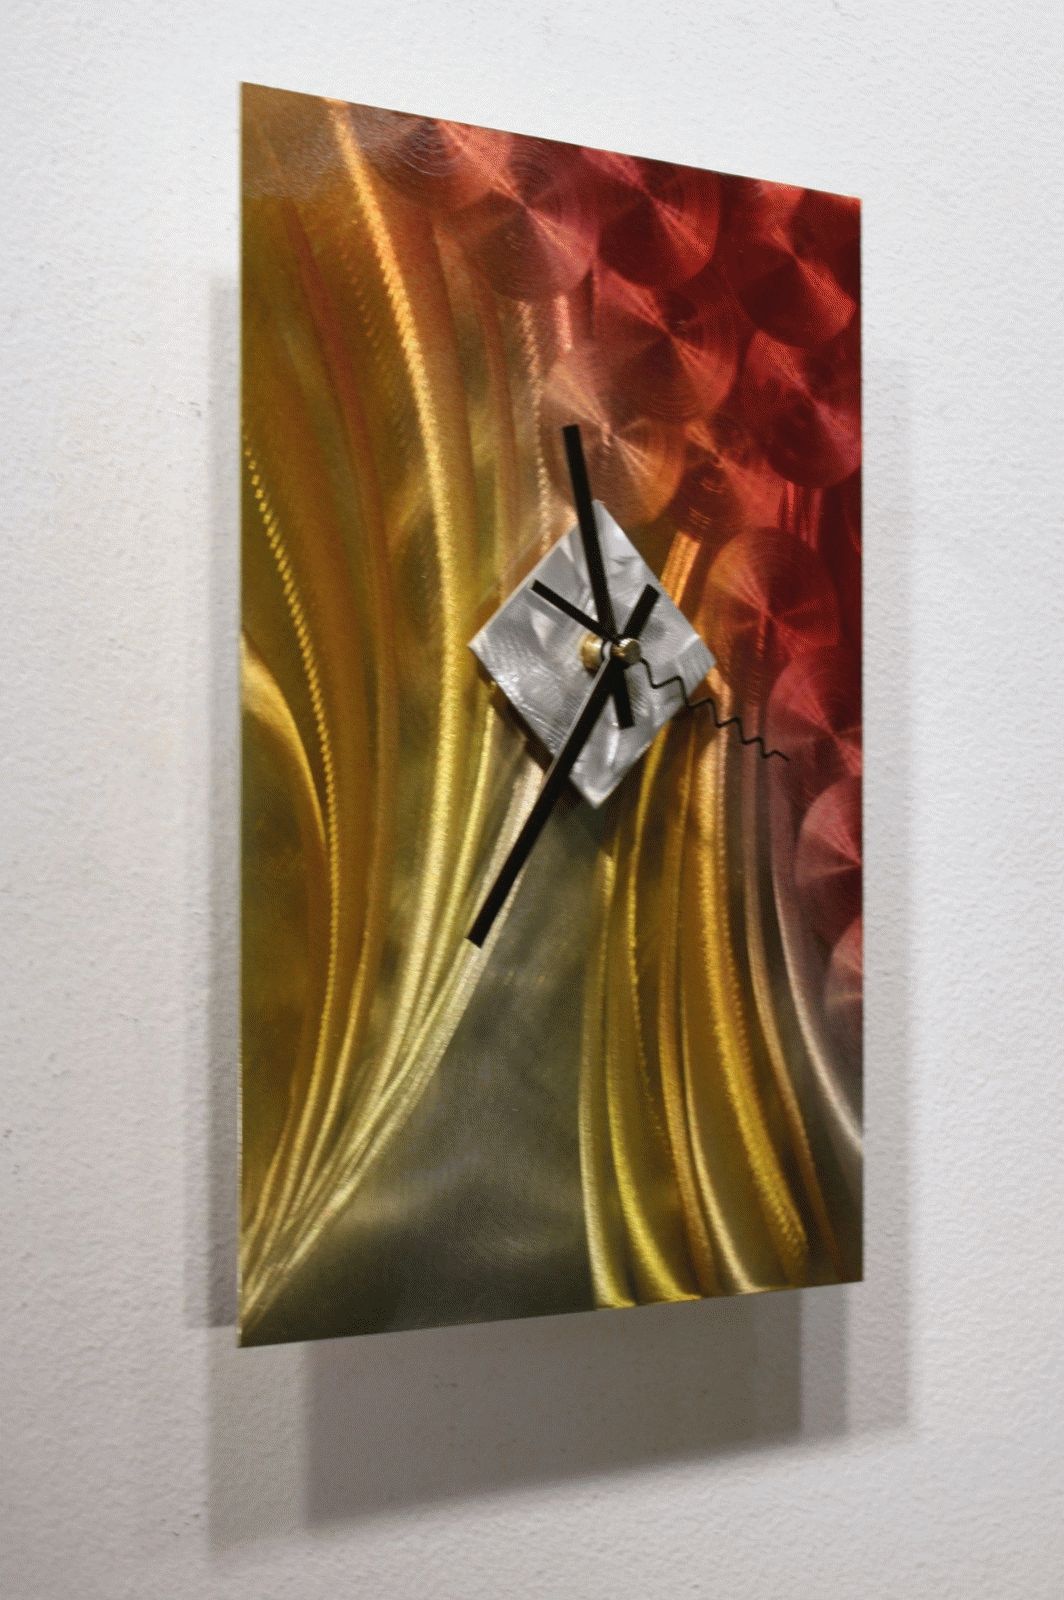 Sculpture Abstract Wall Art Within Widely Used Metal Wall Art Sculpture Clock Modern Abstract Painting Decor (View 10 of 15)